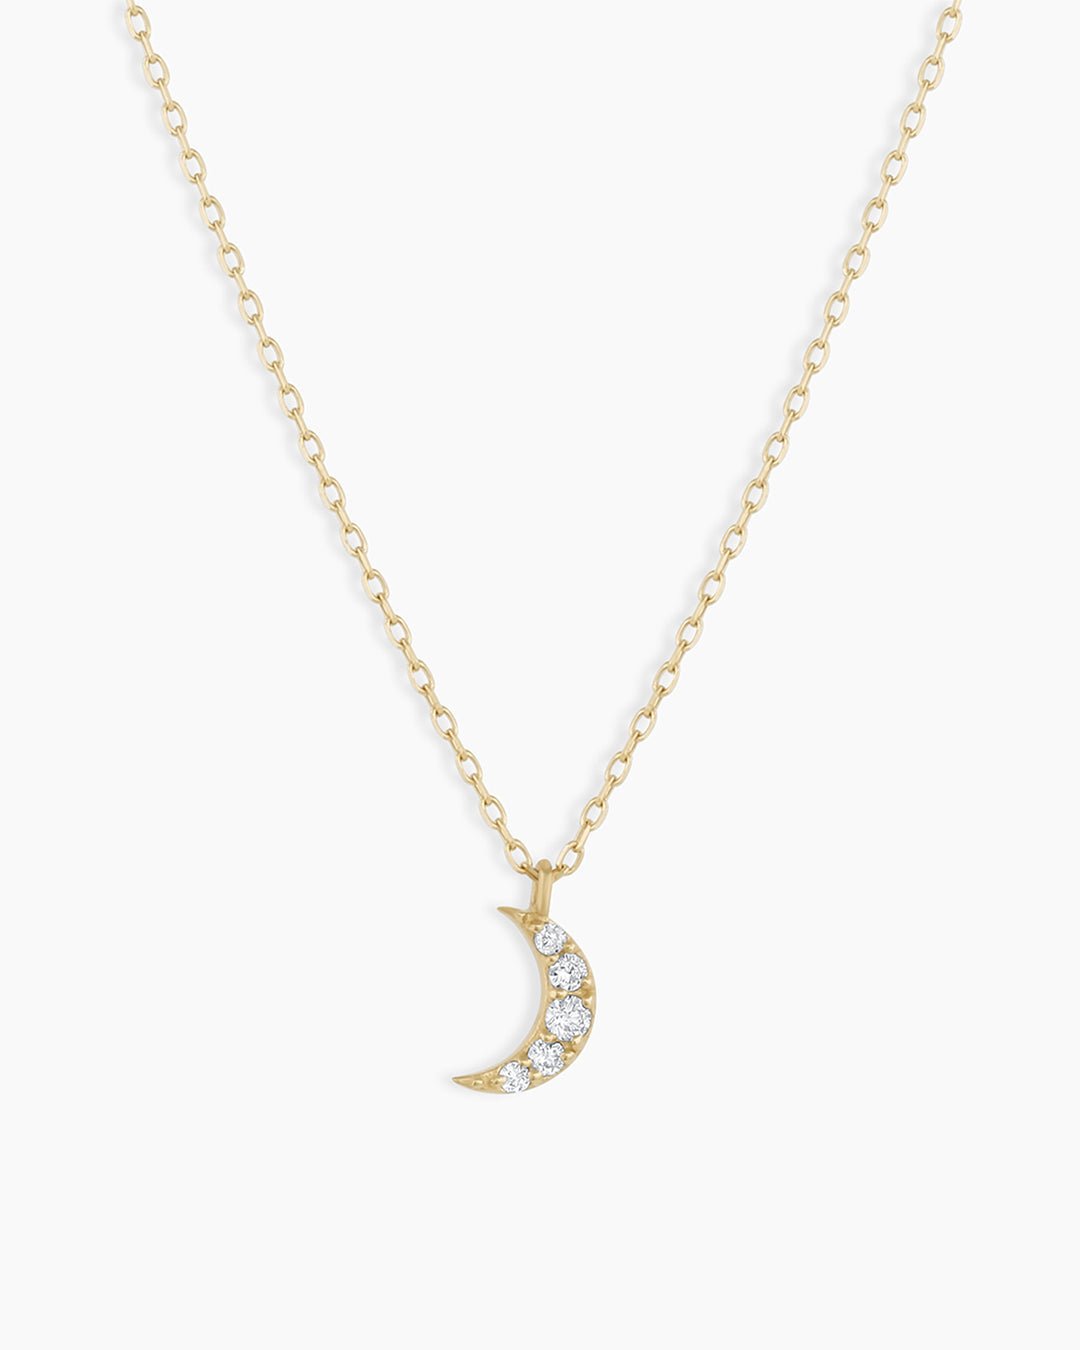 Diamond Crescent NecklaceDiamond Moon Necklace  dainty charm necklace  solidGold Plated moon necklace || option::14k Solid Gold